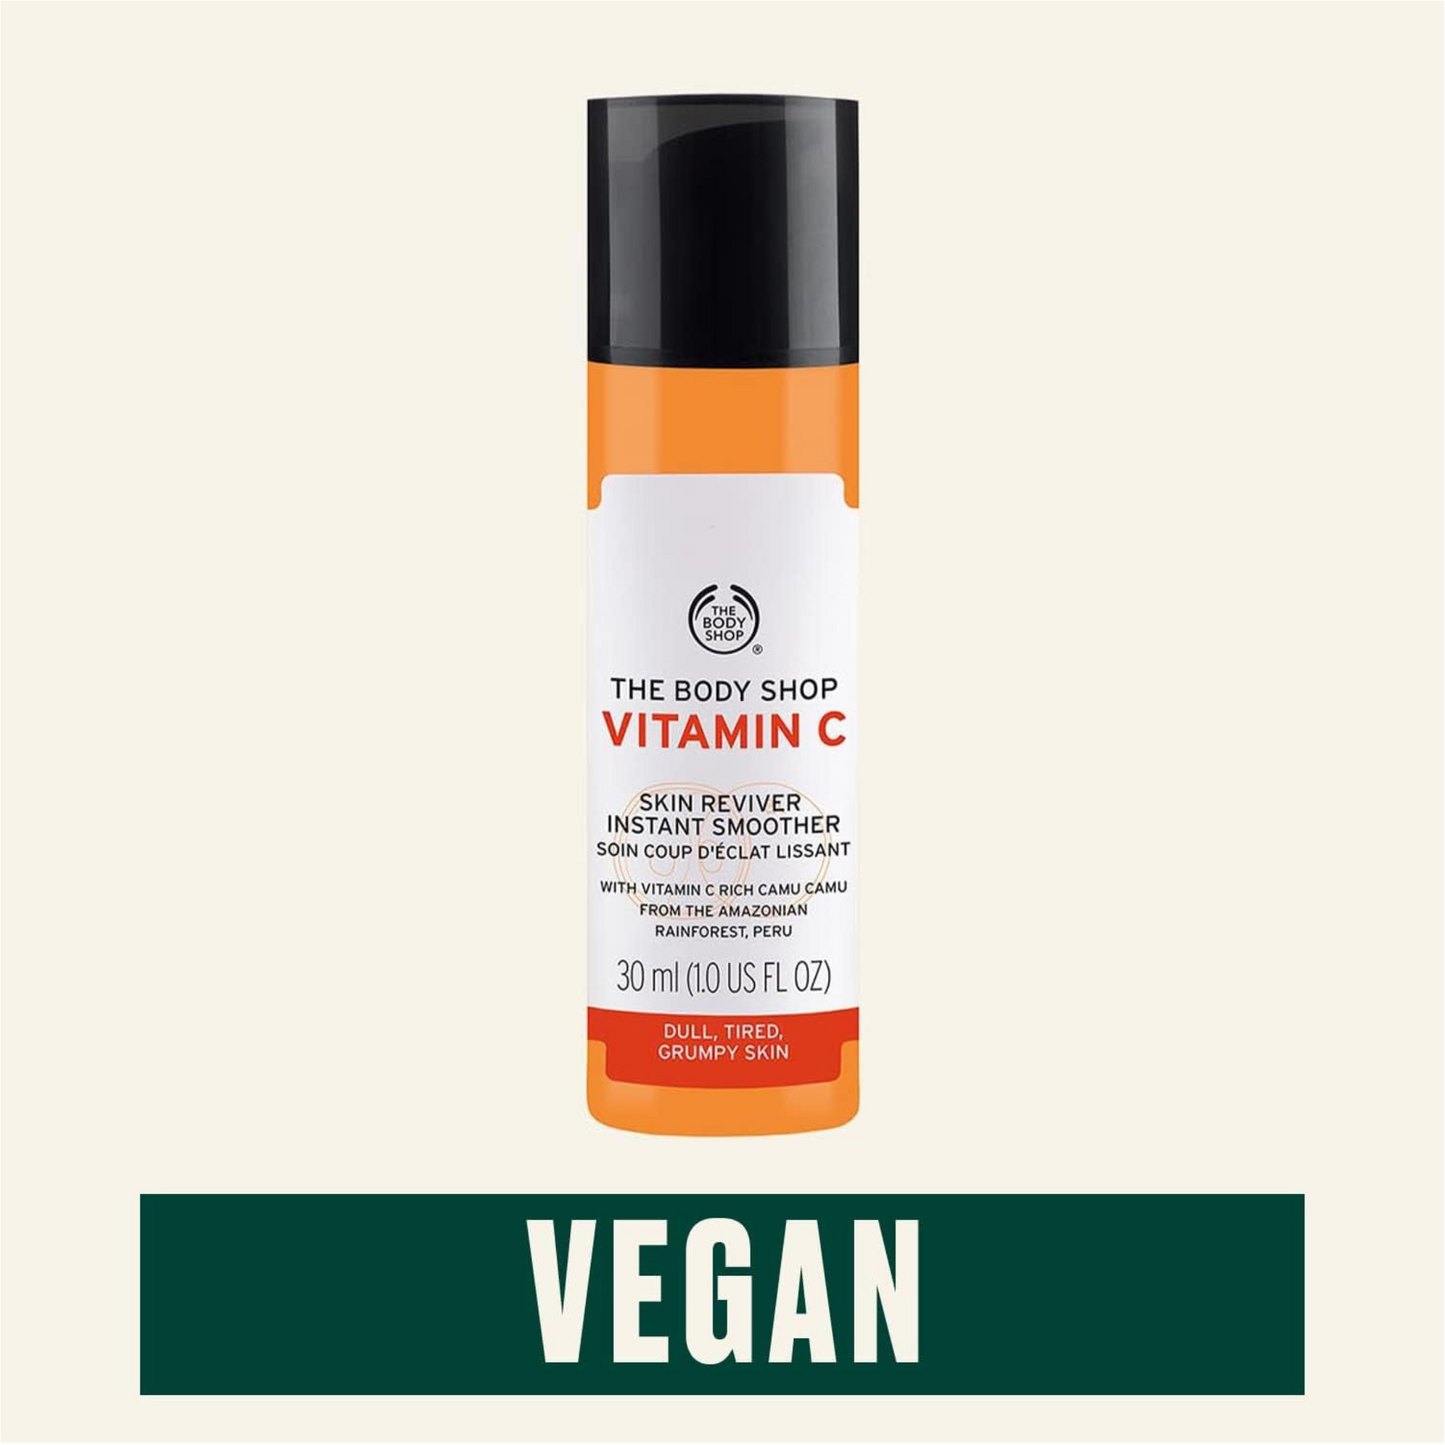 The Body Shop Vitamin C Skin Boost is a light, refreshing serum with mineral glowing particles, it boosts skin’s smoothness, radiance & vitality, leaving it soft. Best imported foreign genuine authentic real UK British premium quality luxury skincare beauty cosmetic cheap price in Dhaka Chittagong Sylhet Bangladesh.